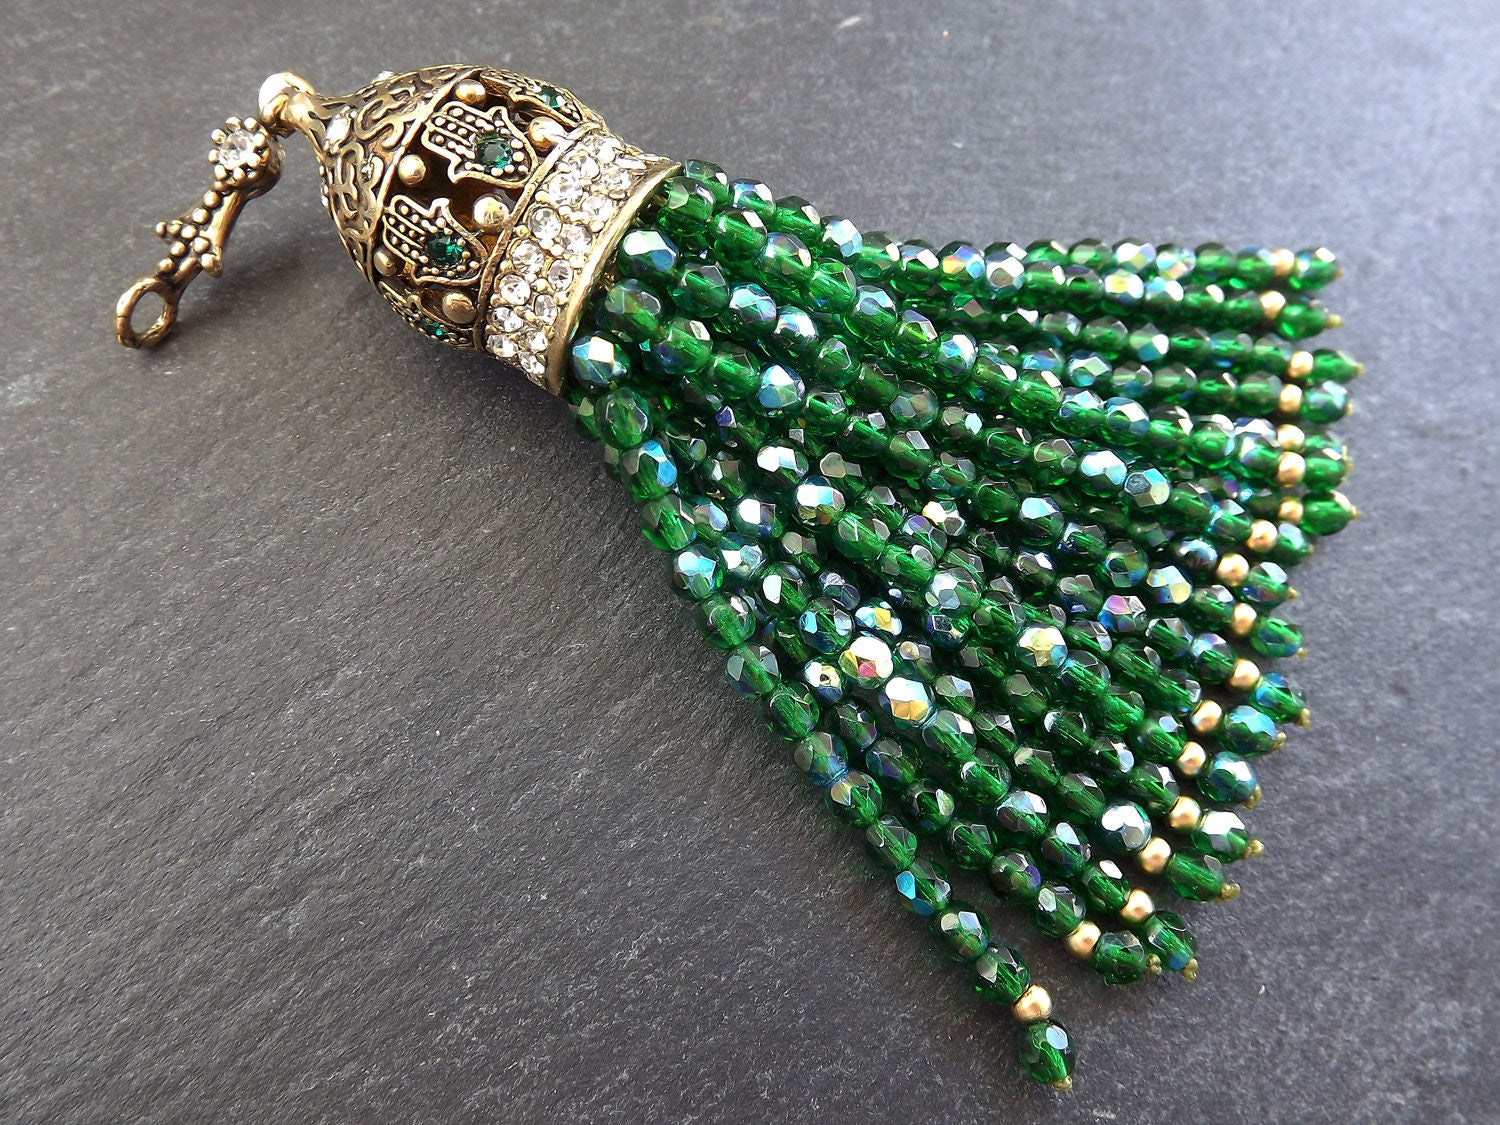 Emerald Green Beaded Tassel with Facet Cut Czech Glass Fire Polished AB Iridescent Beads Antique Bronze Rhinestone Accents - 1PC